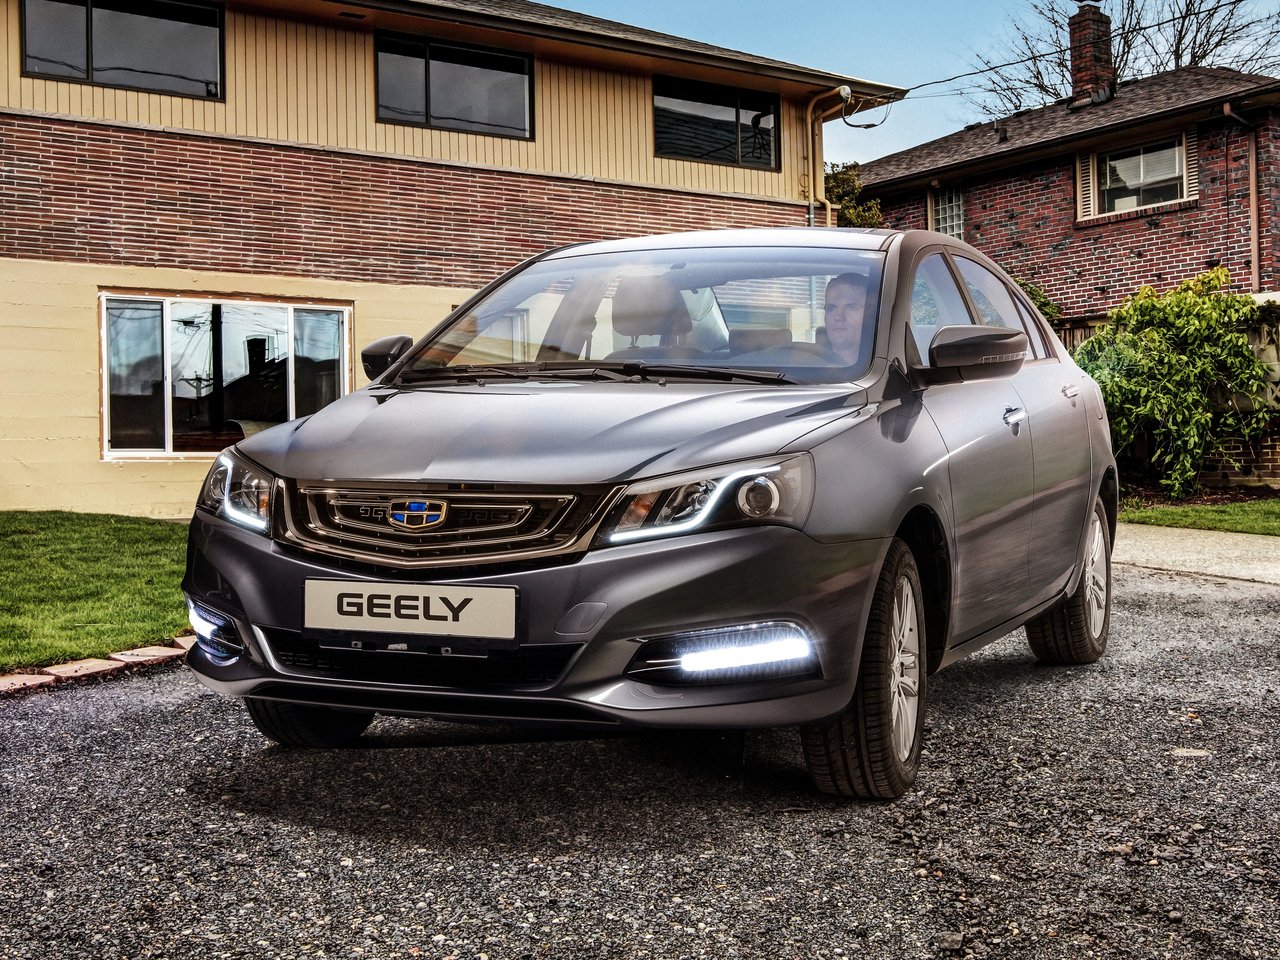 GEELY Emgrand 7